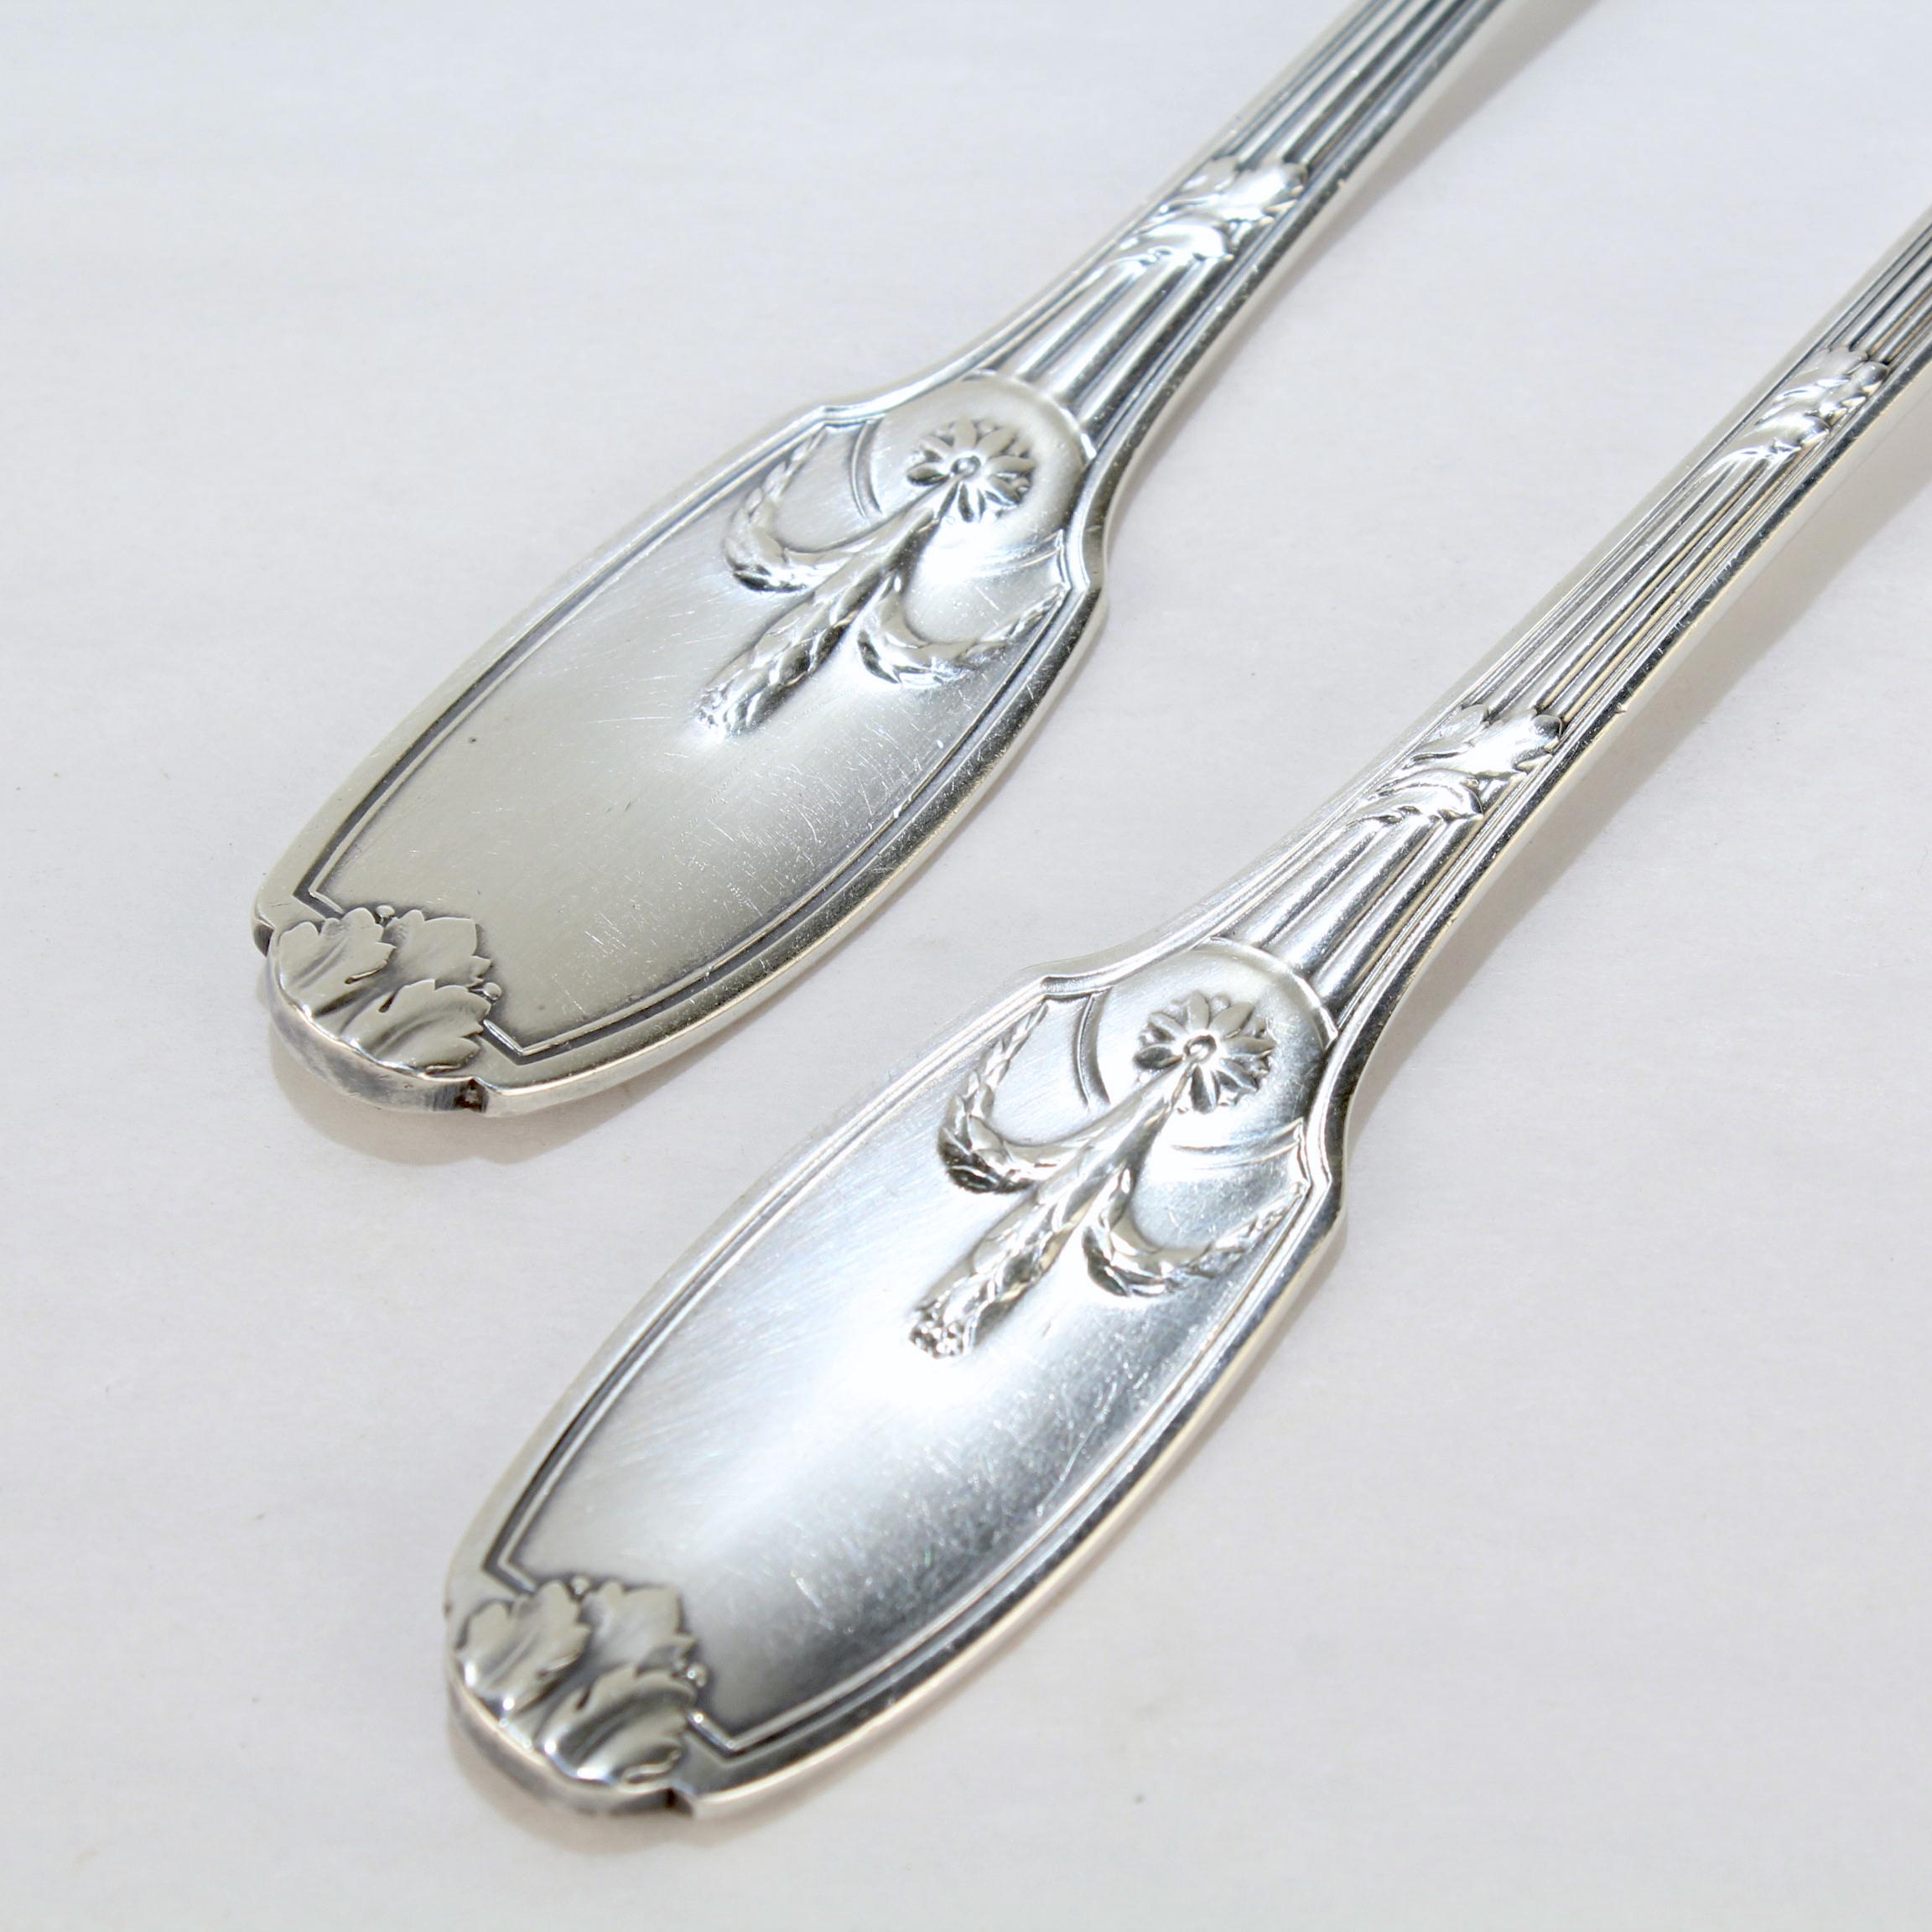 Pair Christofle France Delafosse Silverplate Fork & Spoon Salad Servers For Sale 1